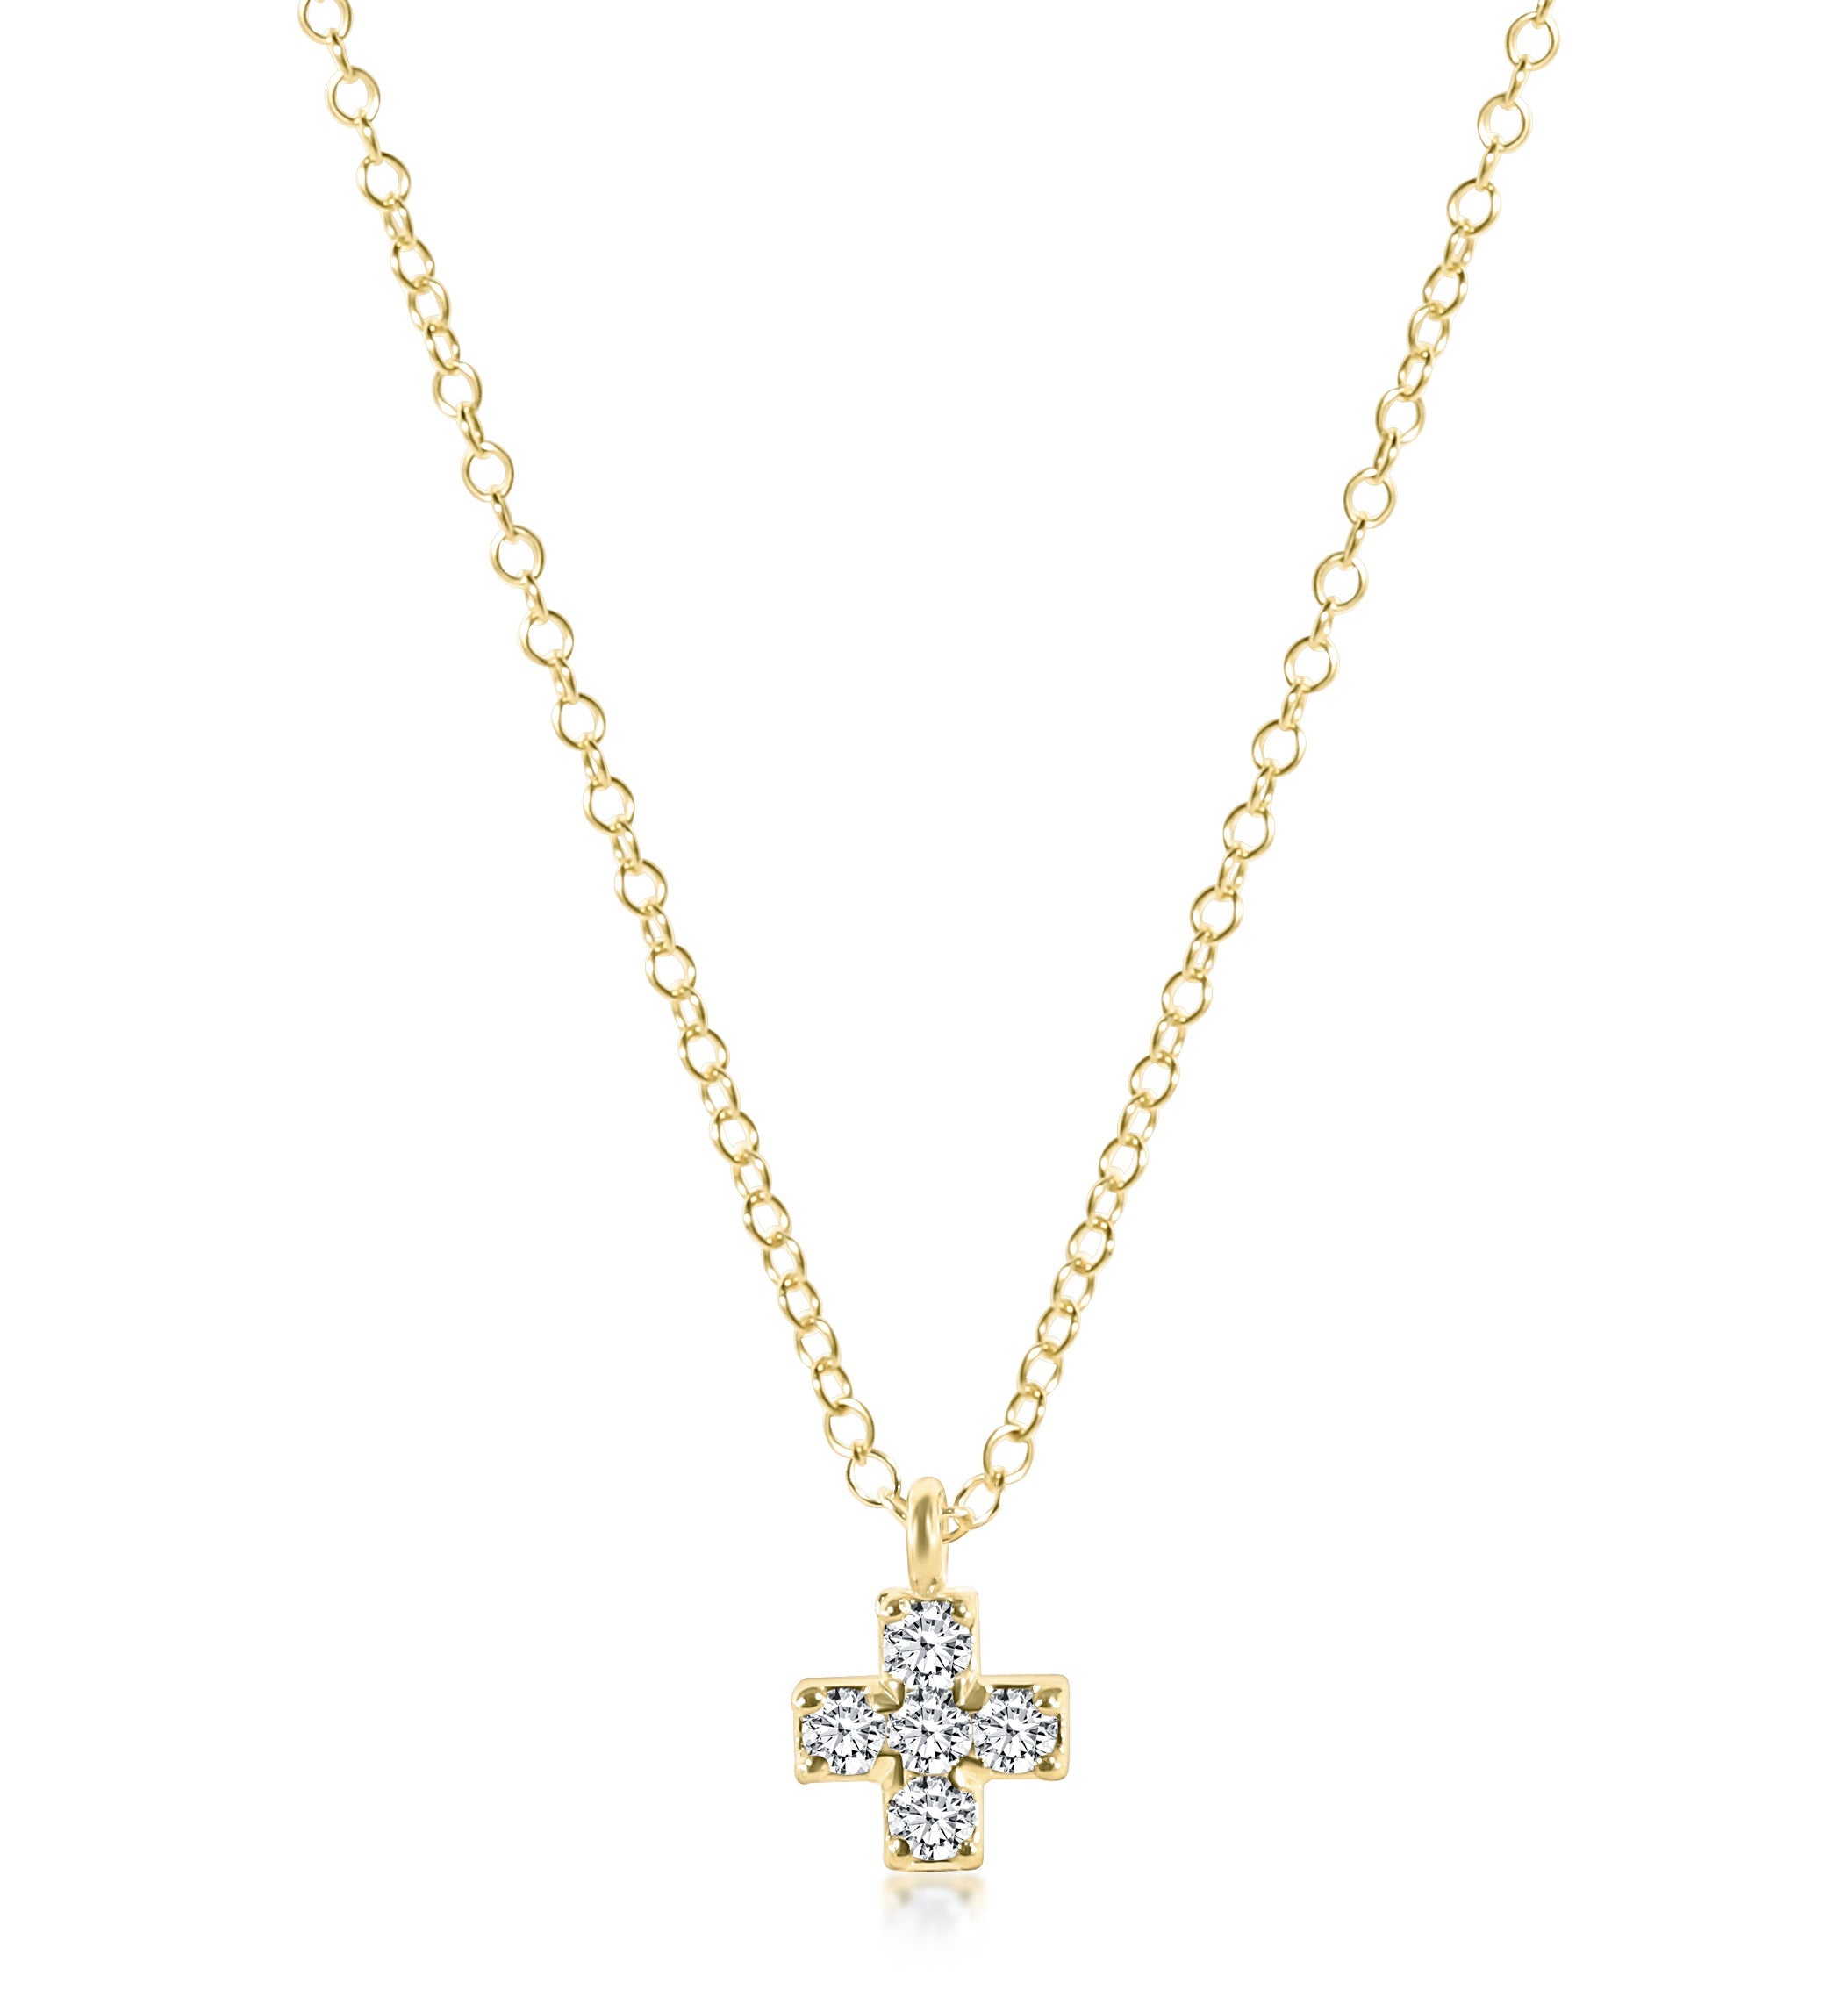 E Newton Necklace with Cherish Gold Locket – The Buttercup Charlotte